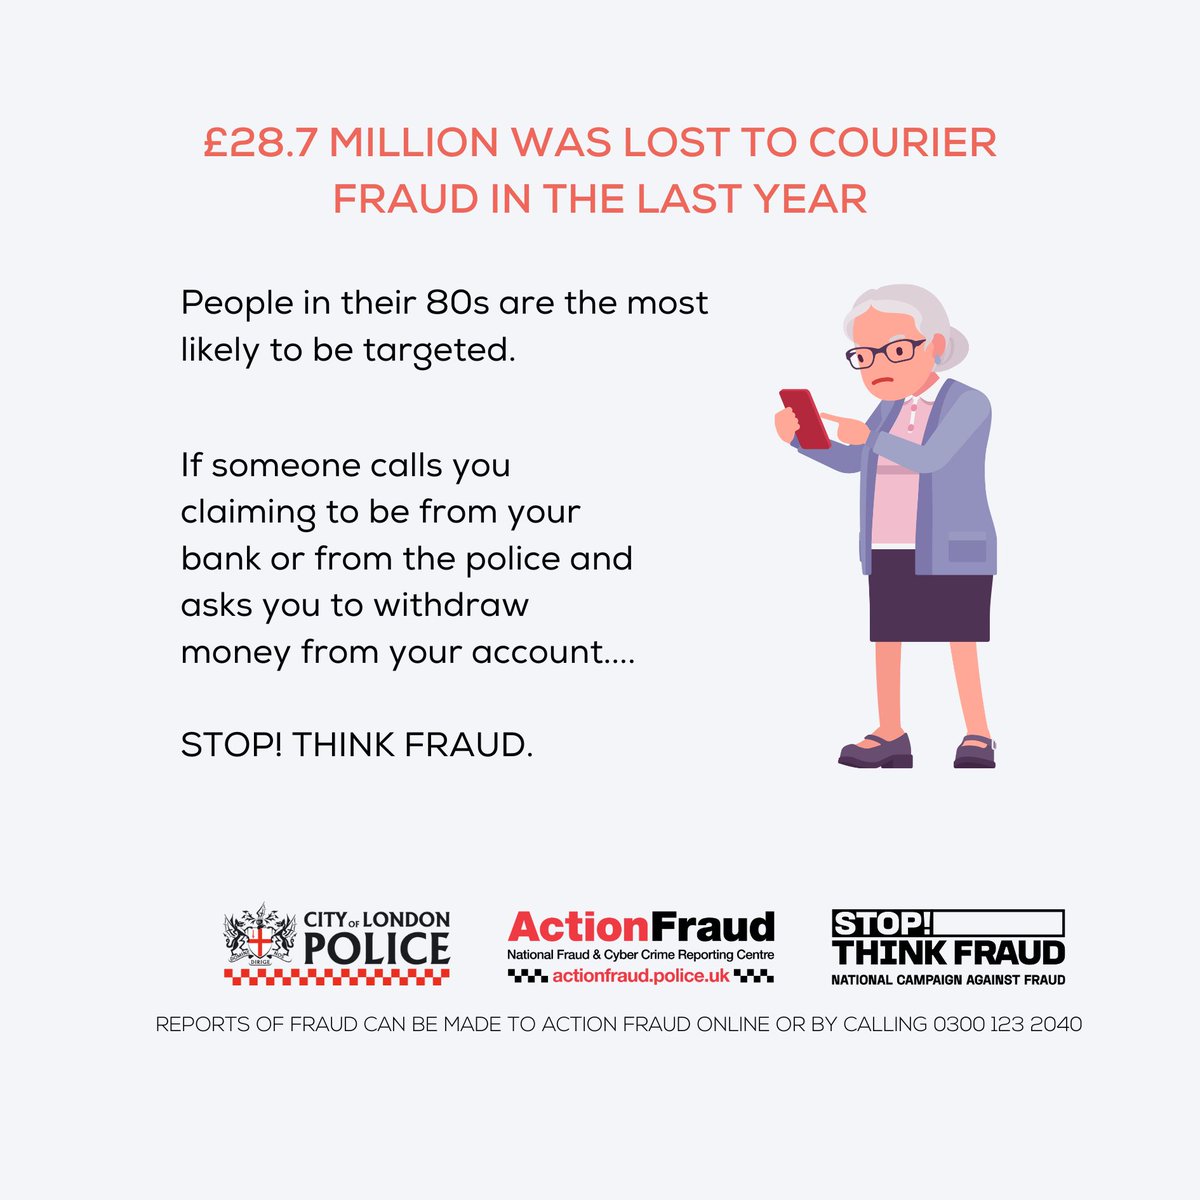 #COURIERFRAUD | Pensioners are being urged to be vigilant after data revealed that more than £28.7 million was lost to courier fraud in the last year. To read the full release, visit our website: orlo.uk/m3wmi